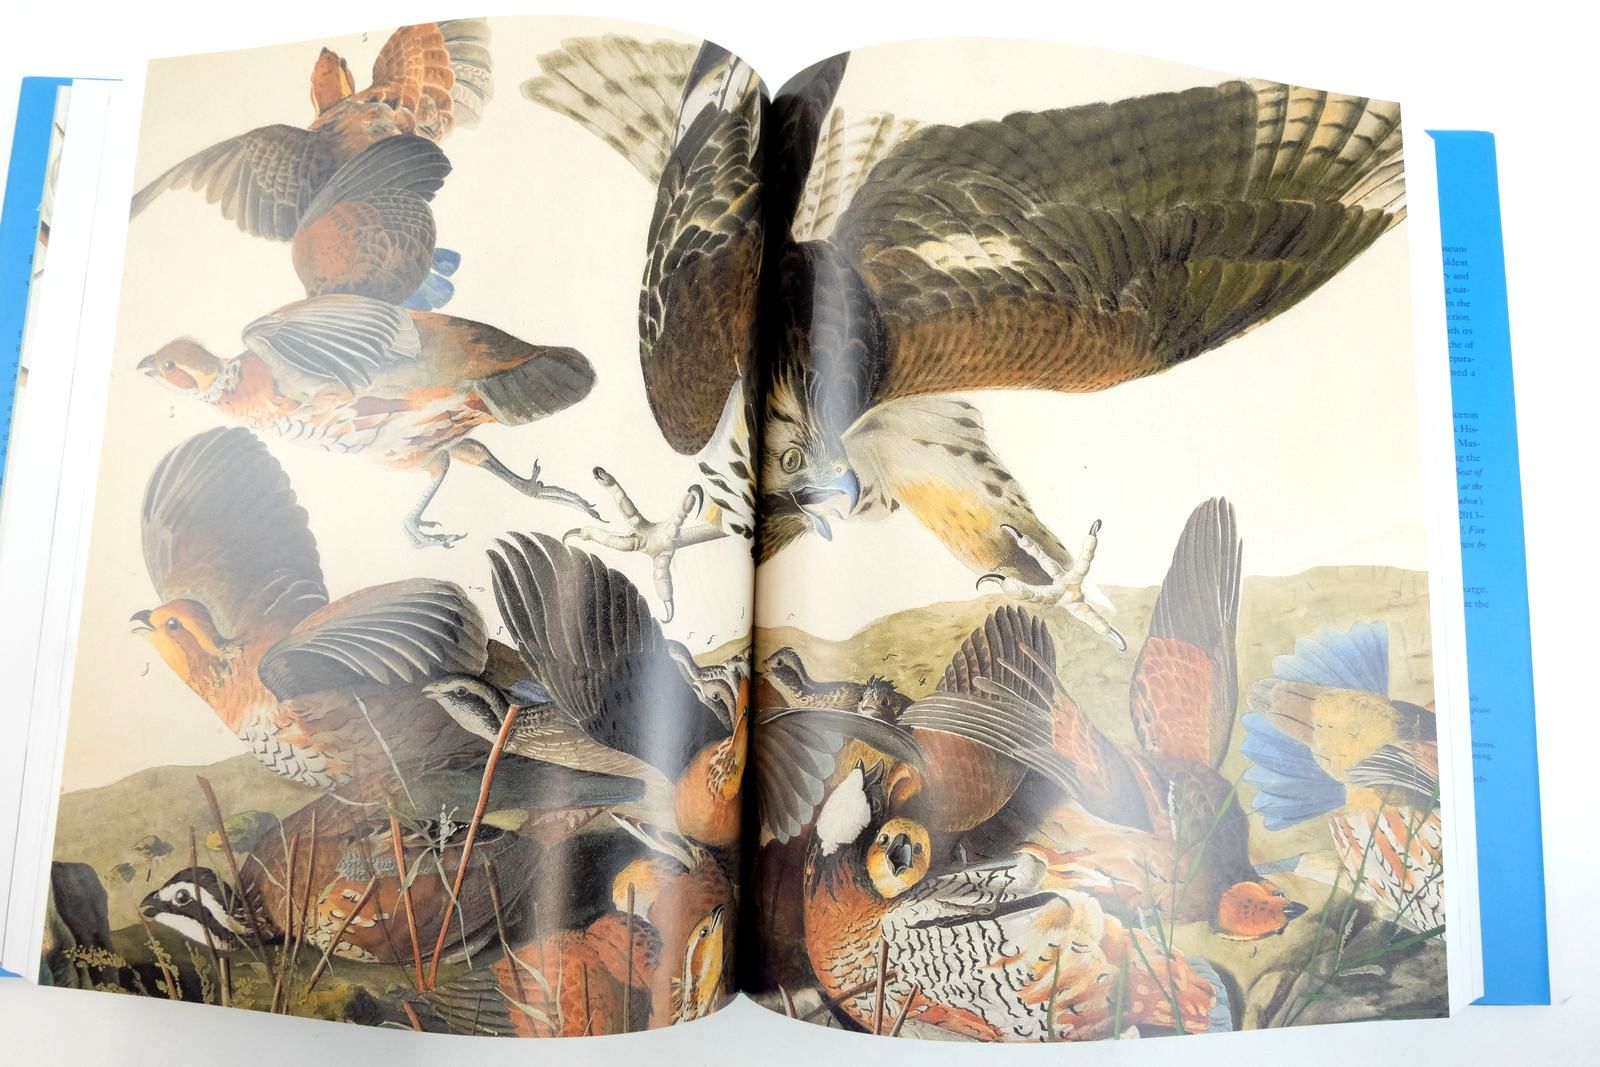 Photo of AUDUBON'S AVIARY: THE ORIGINAL WATERCOLORS FOR THE BIRDS OF AMERICA written by Olson, Roberta J.M.
Shelley, Marjorie
Mazzitelli, Alexandra published by Skira Rizzoli Publications, Inc., The New-York Historical Society (STOCK CODE: 2136489)  for sale by Stella & Rose's Books